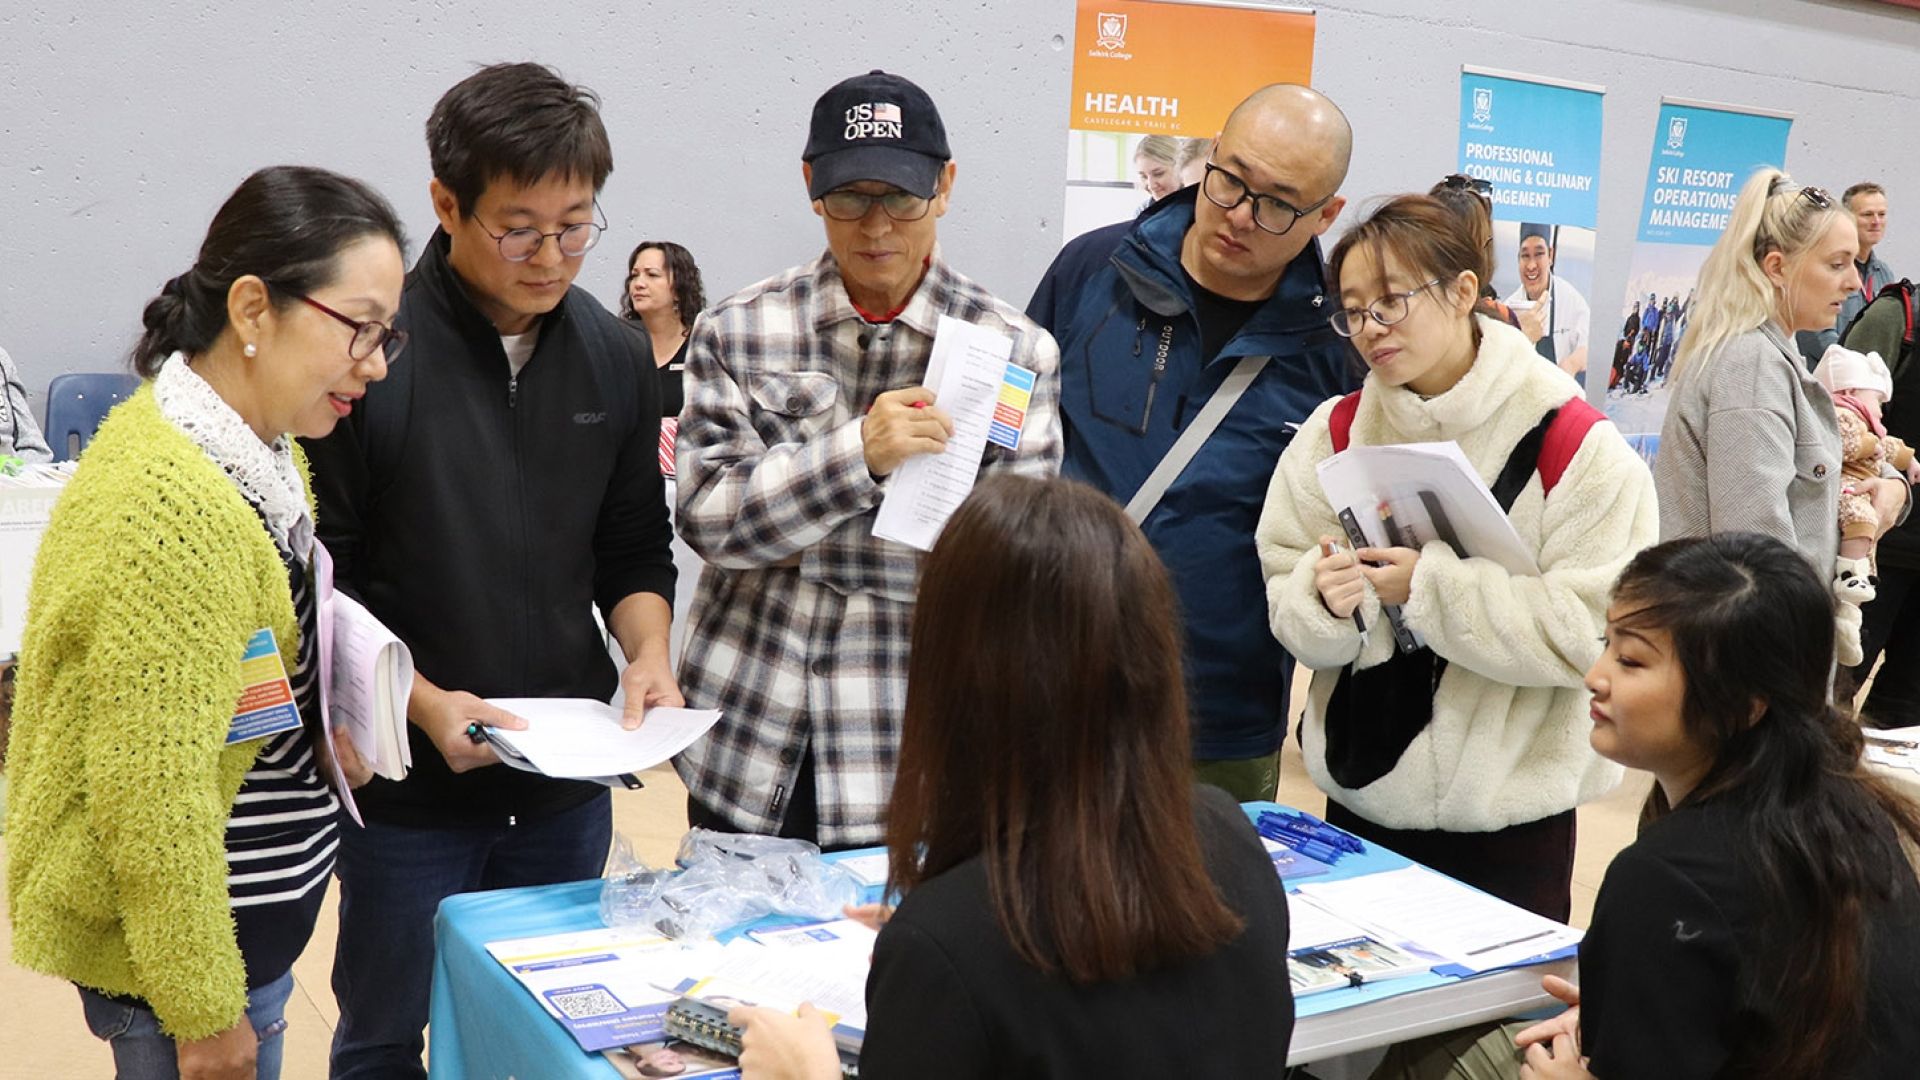 A group of people gather around an information table